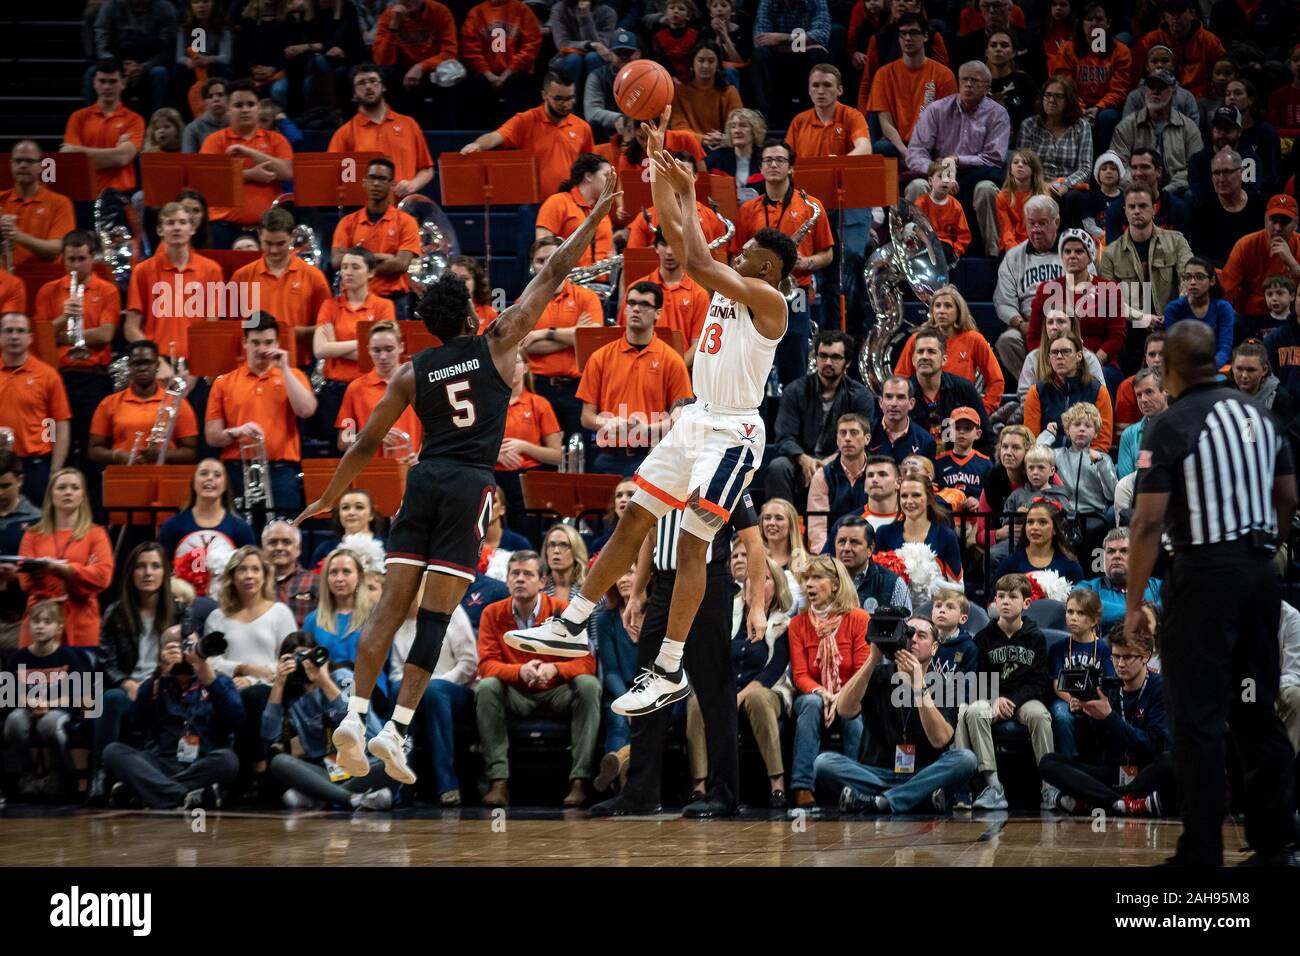 Charlottesville, VA, USA. 22nd Dec, 2019. Virginia Guard Casey Morsell (13) shoots over South Carolina Guard Jermaine Couisnard (5) during the NCAA Basketball game between the University of South Carolina Gamecocks and University of Virginia Cavaliers at John Paul Jones Arena in Charlottesville, VA. Brian McWaltersCSM/Alamy Live News Stock Photo